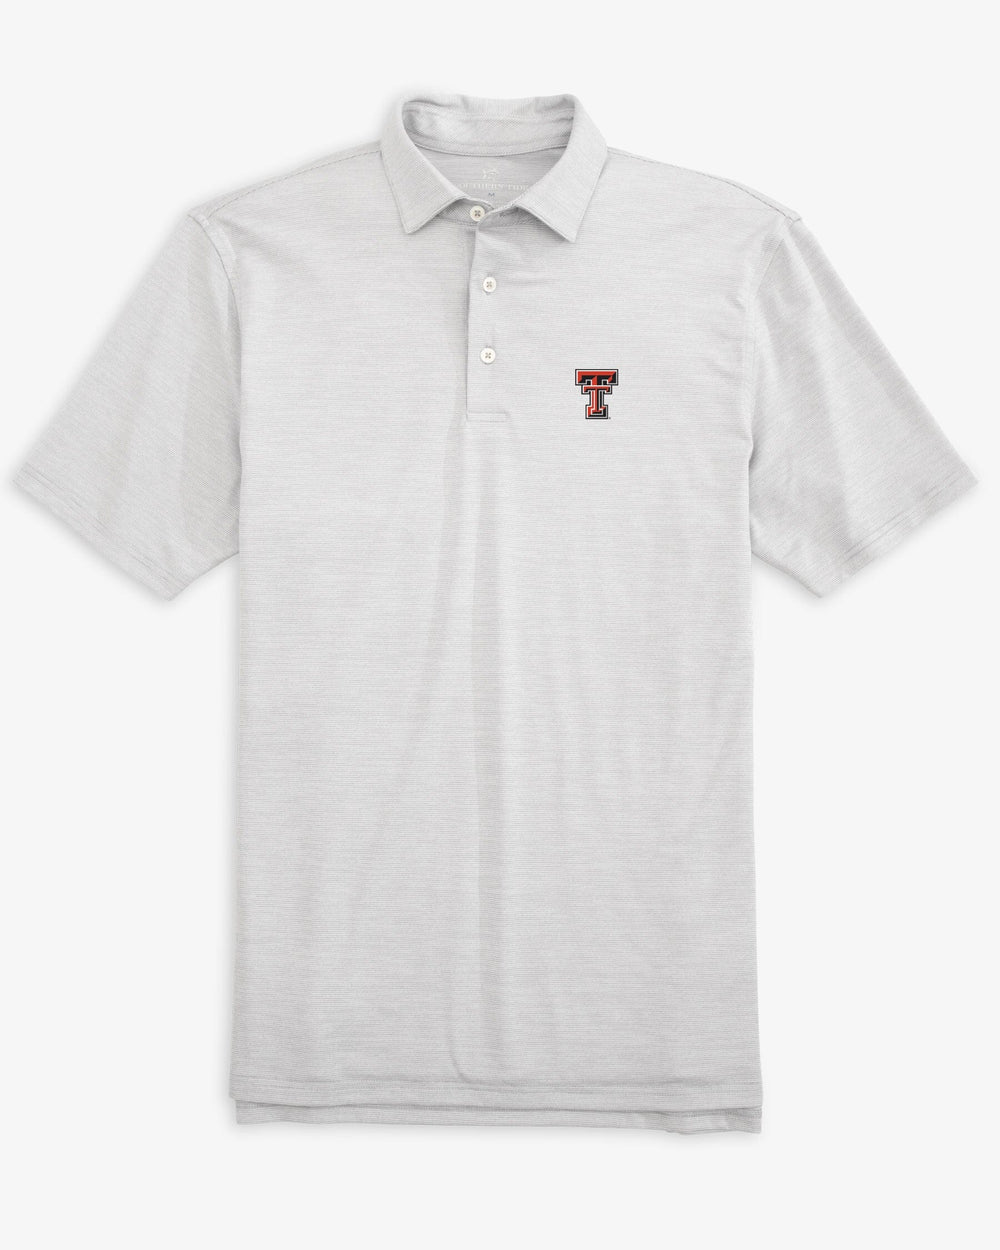 The front view of the Texas Tech Driver Spacedye Polo Shirt by Southern Tide - Slate Grey